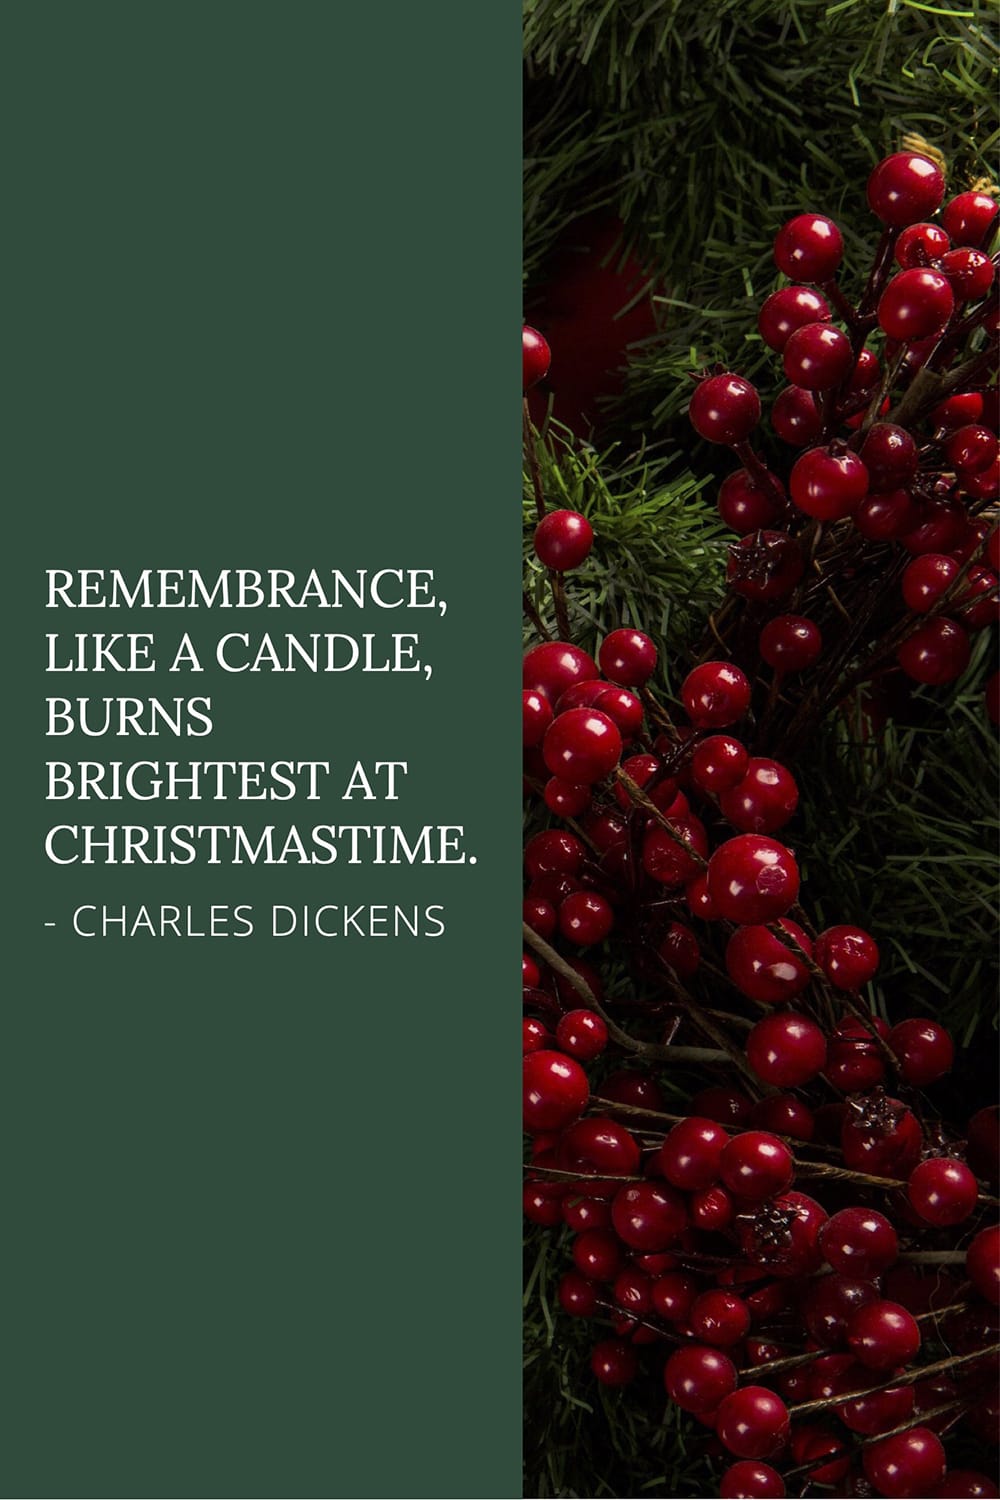 Best short Christmas quotes 6